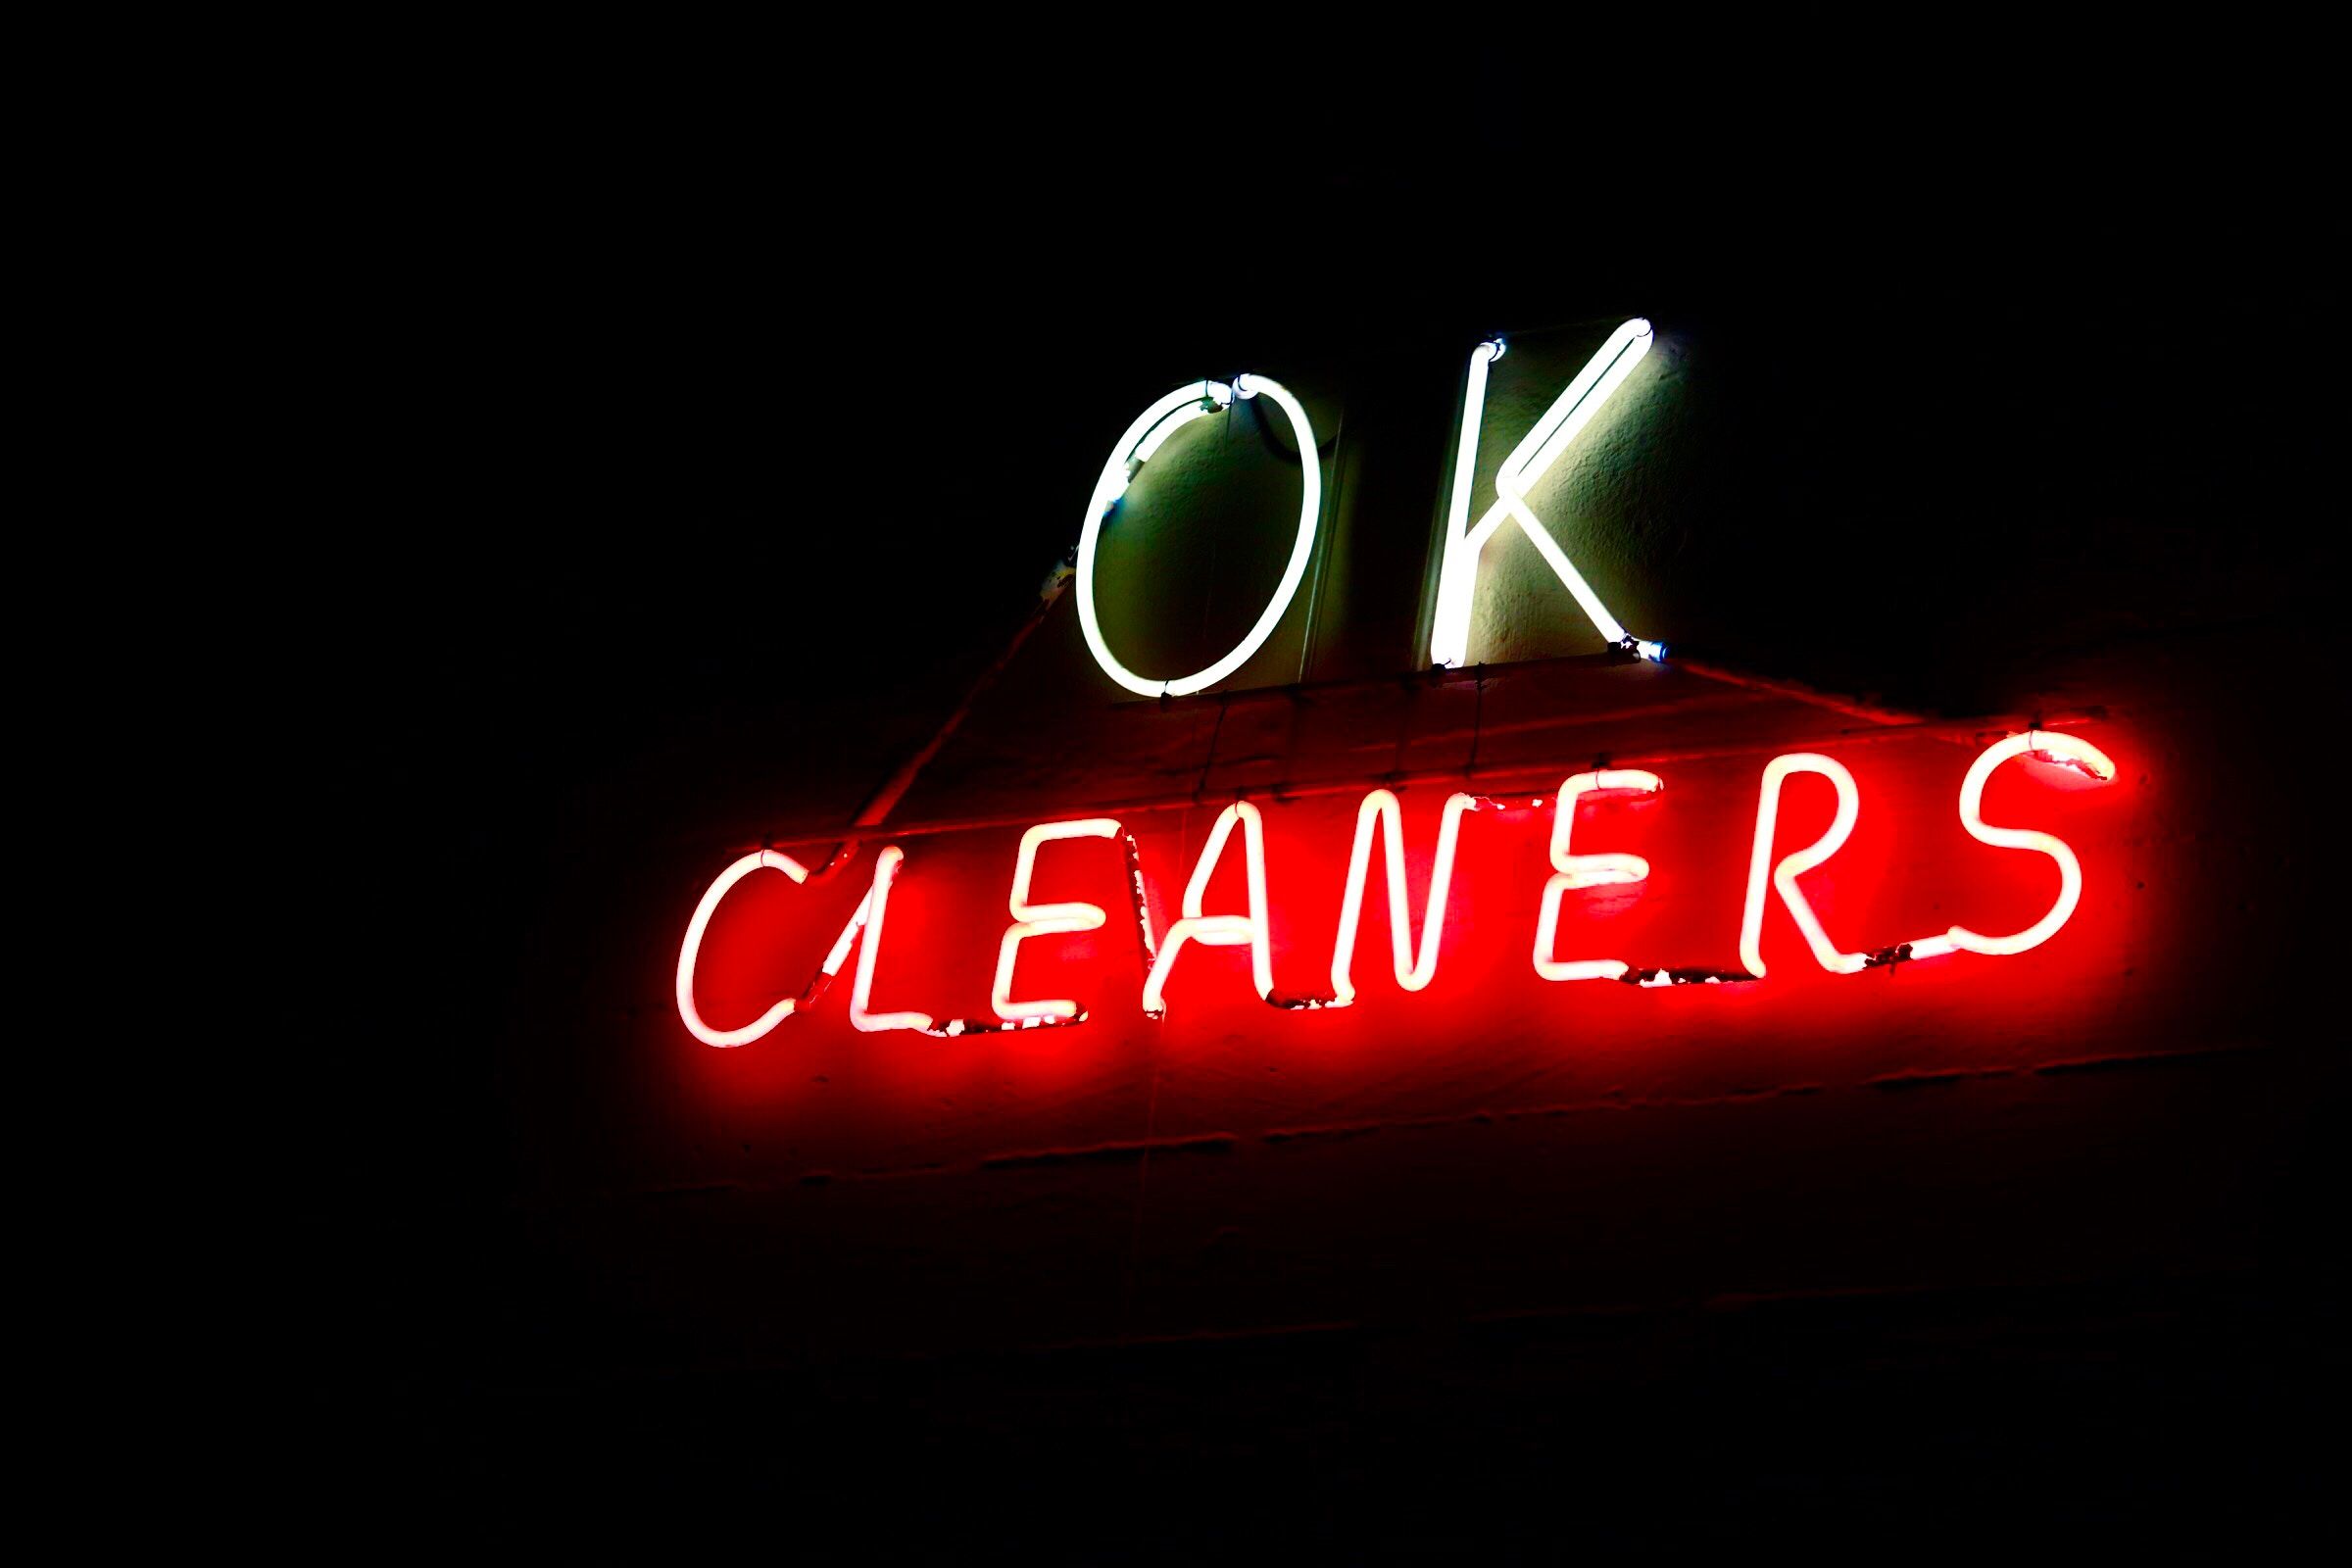 2400x1600 #neon, #night, #red, #marketing, #ok, #sell, #sign, #light, #business, #cleaners, #Free image, #cleaner, #dark, #advertisement, #company, #shine. Mocah.org HD Desktop Wallpaper